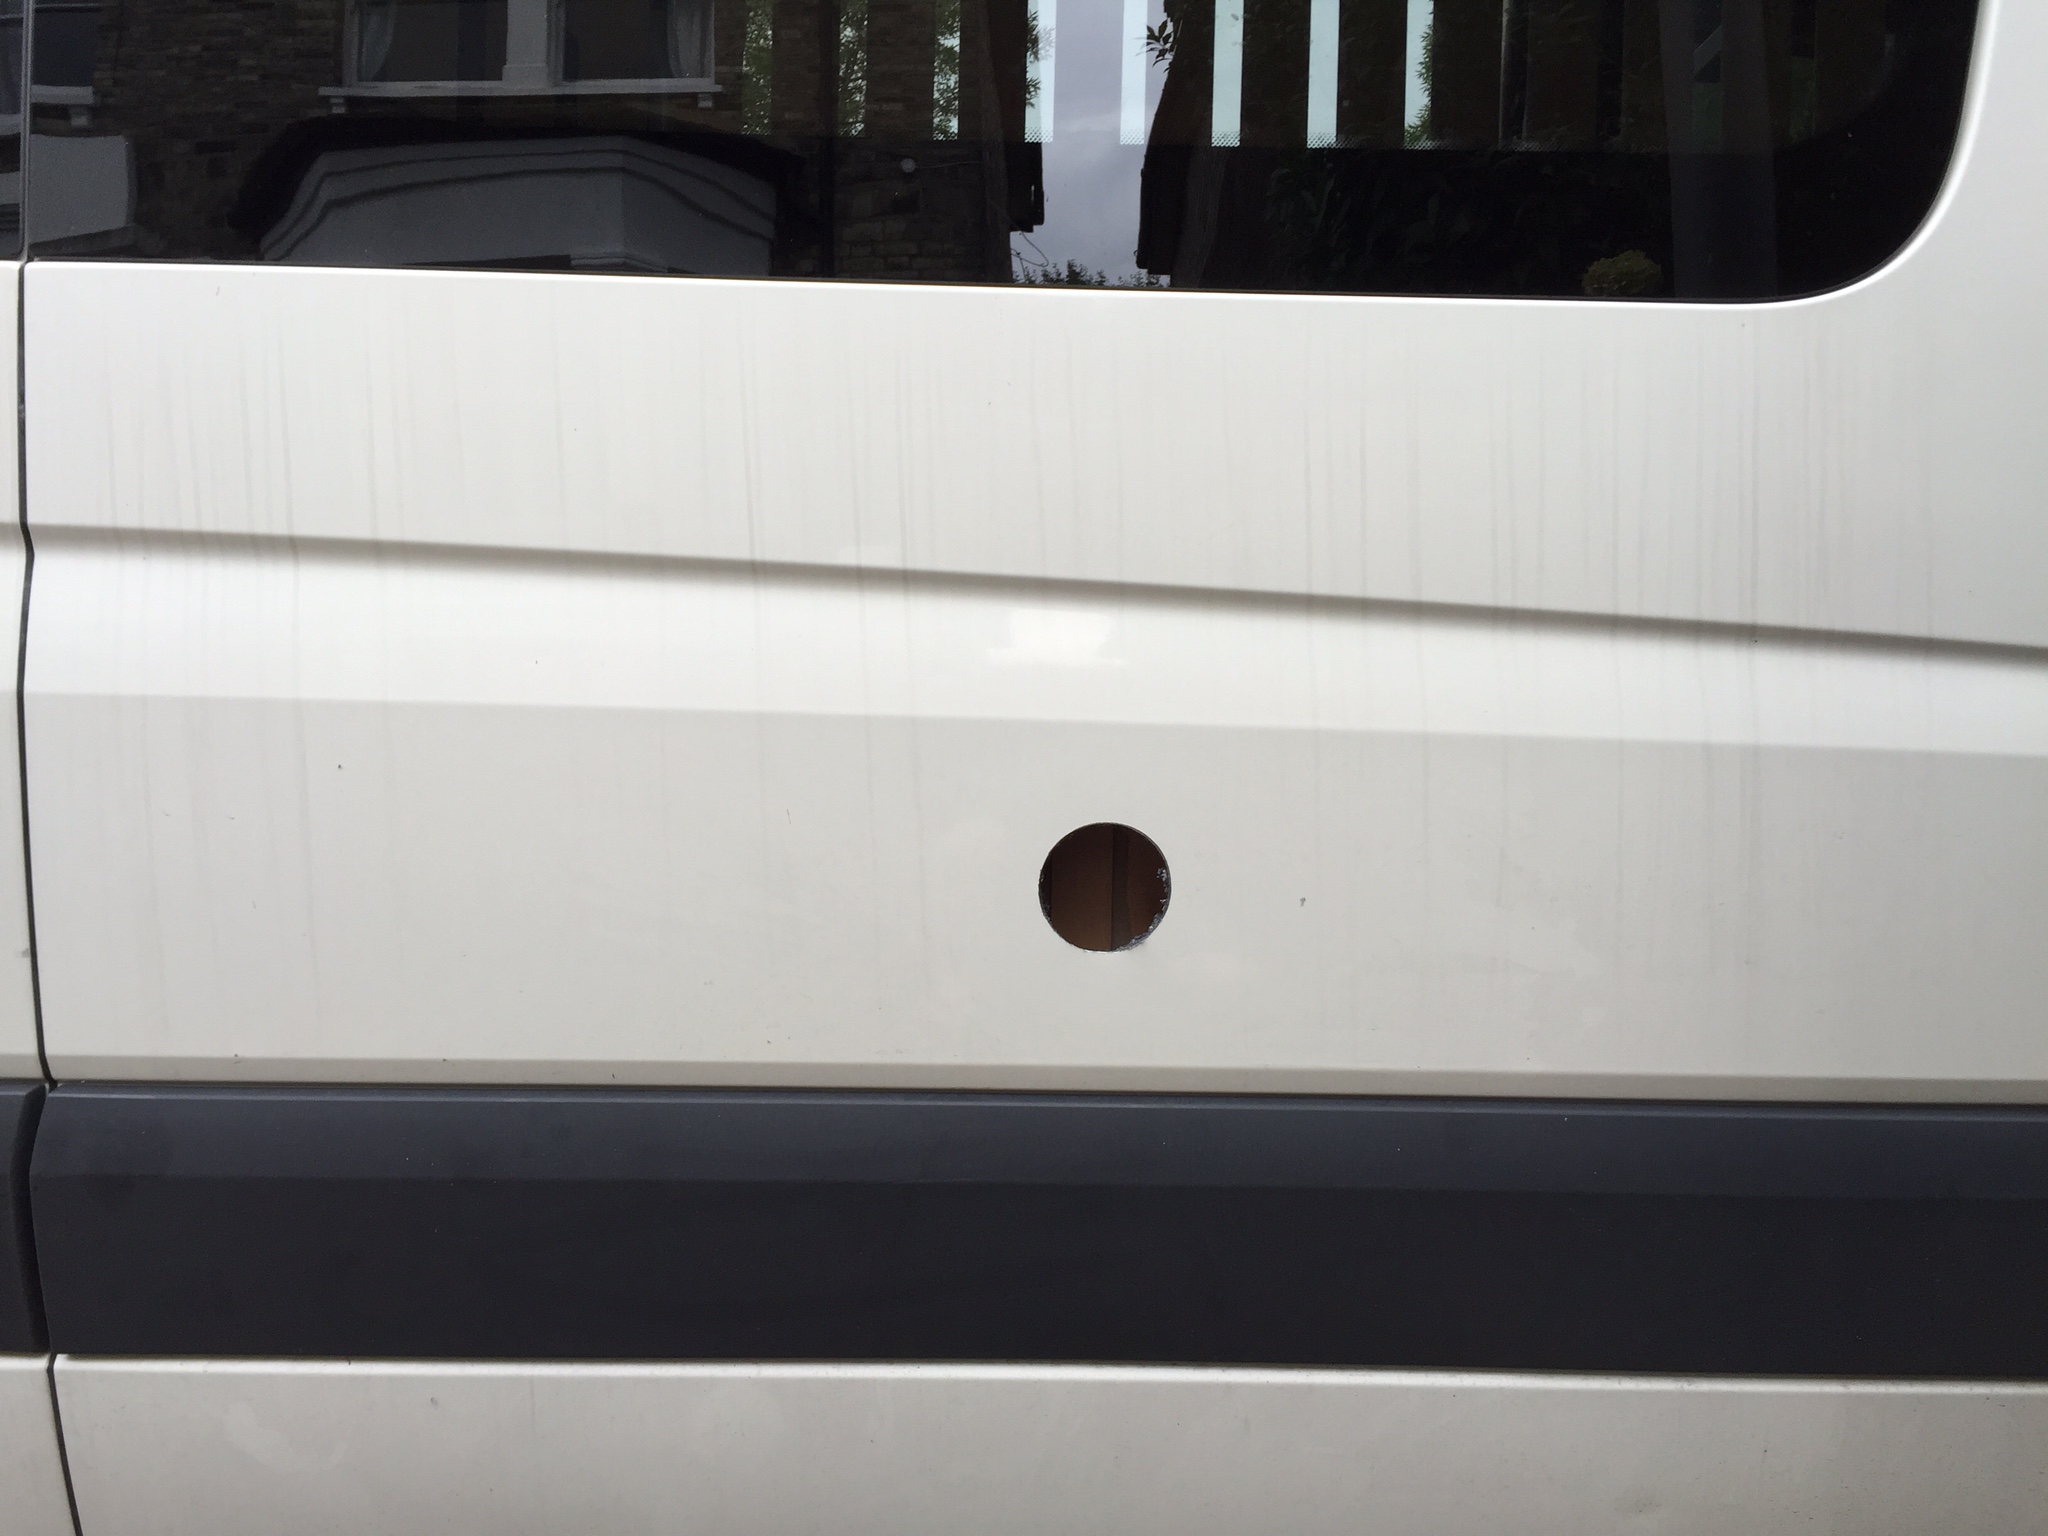 Hole in the van for electric hook-up